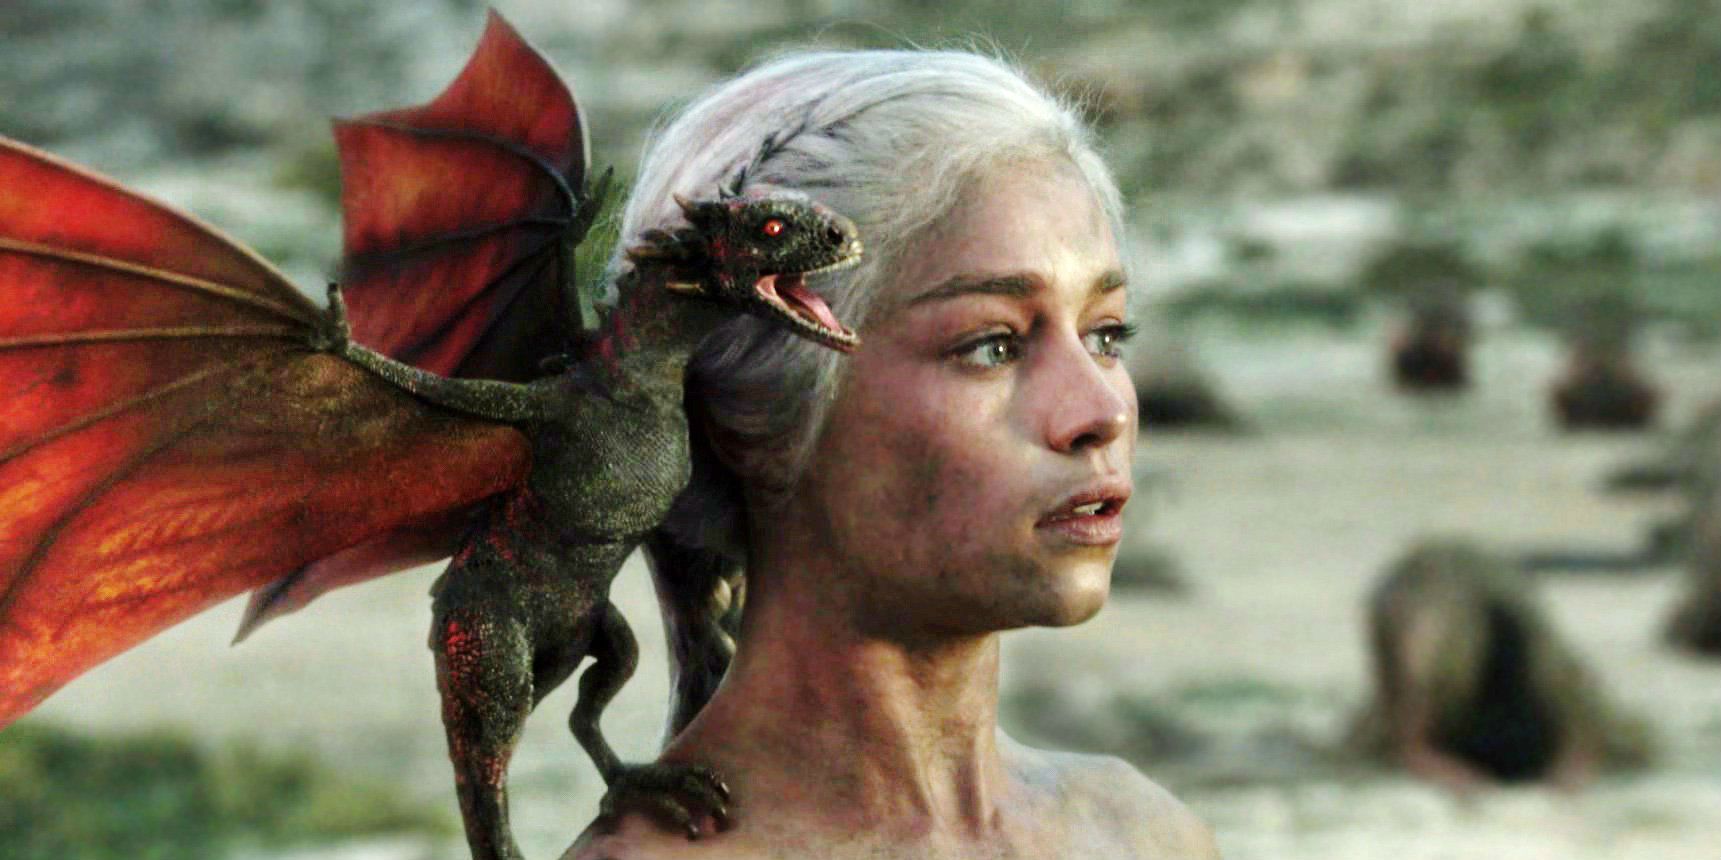 Shes a Mad Mad Queen 10 Signs Daenerys Was Always Going To Be Game of Thrones Ultimate Evil